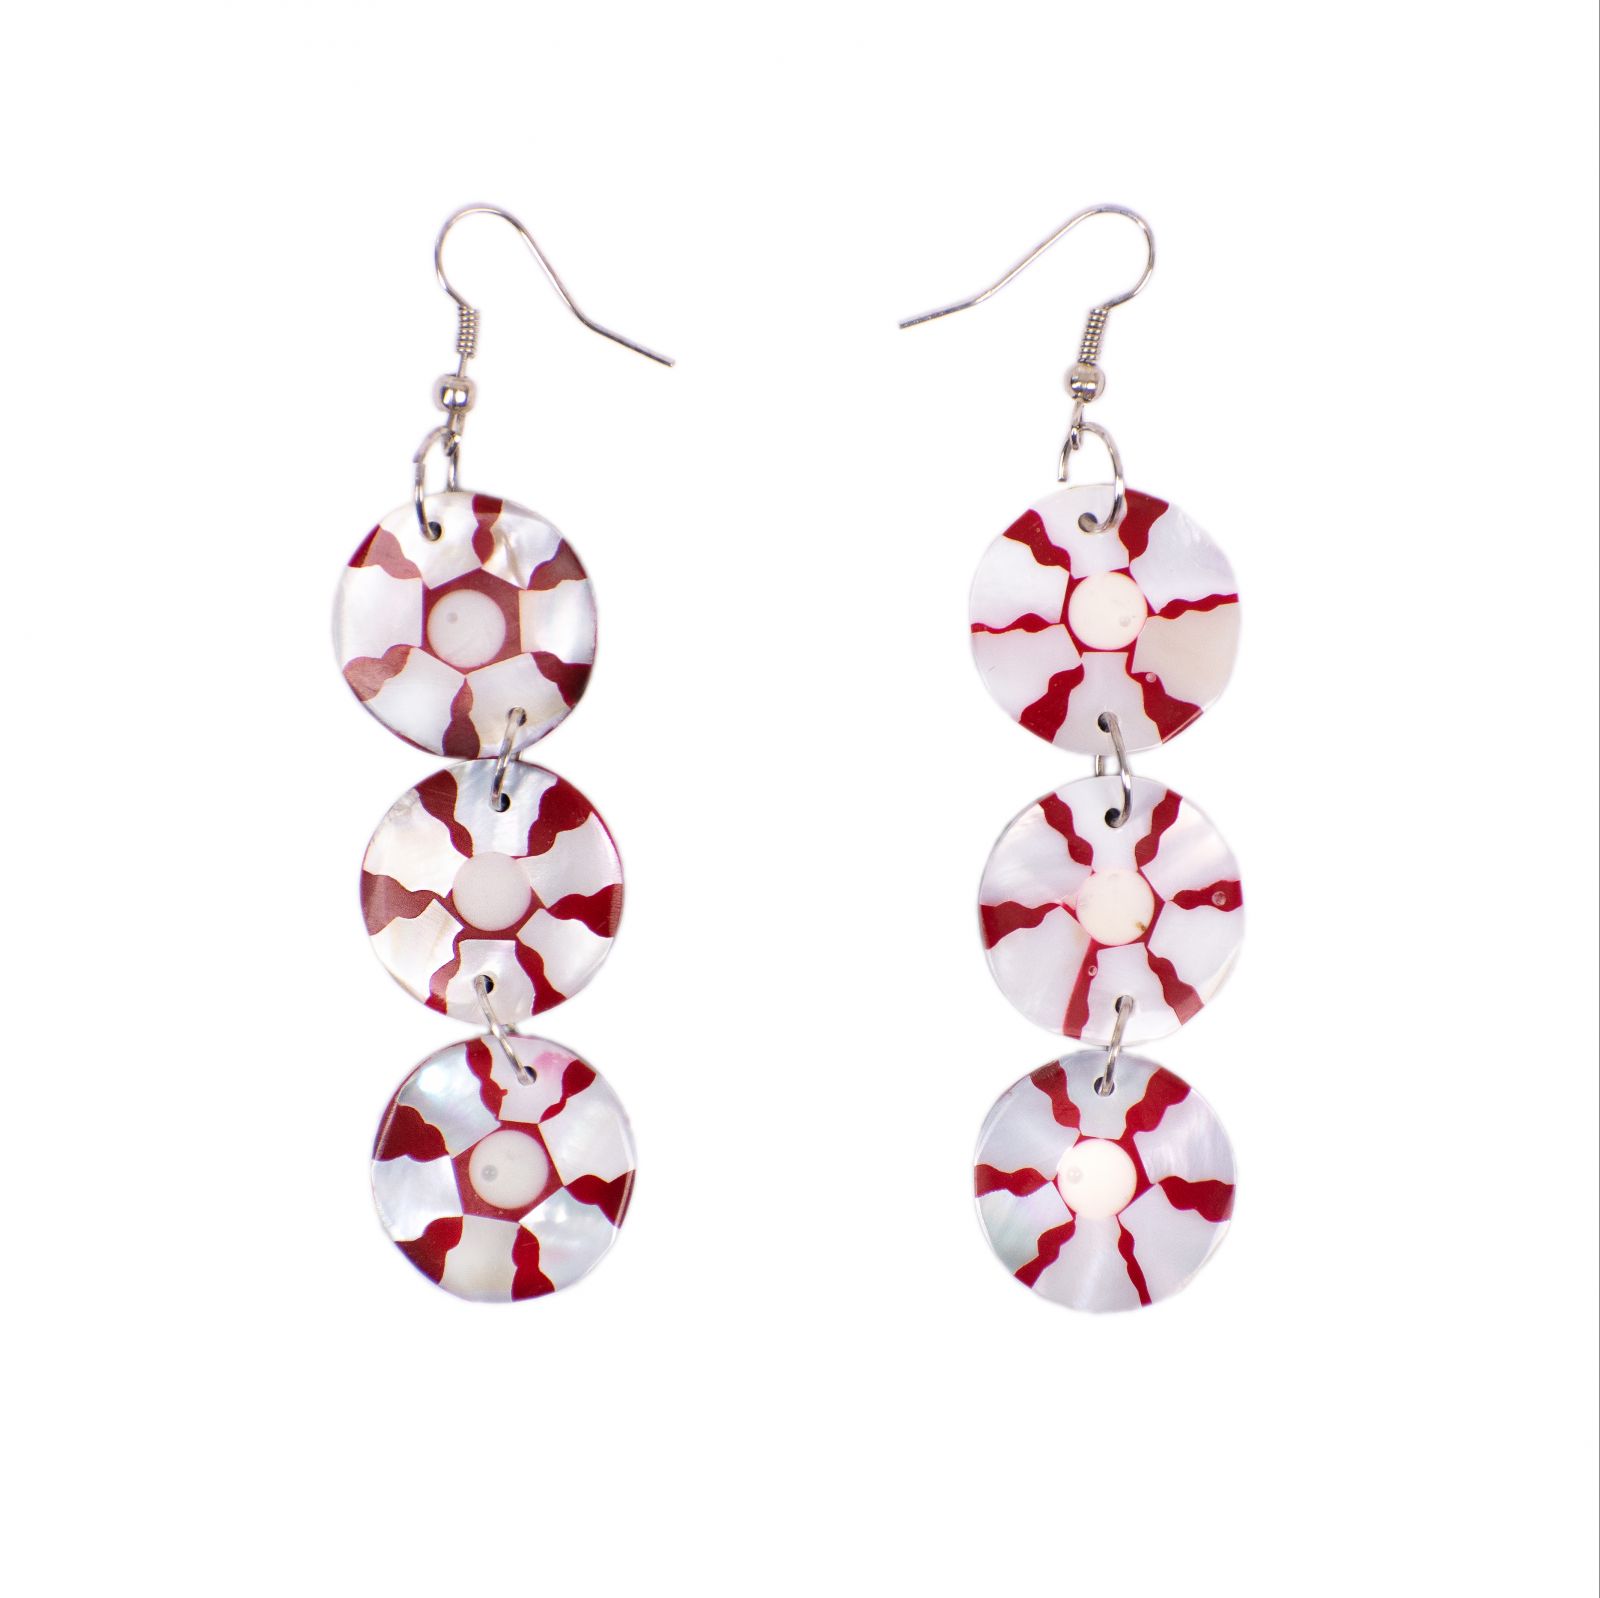 Shell earrings Six discs – red Indonesia